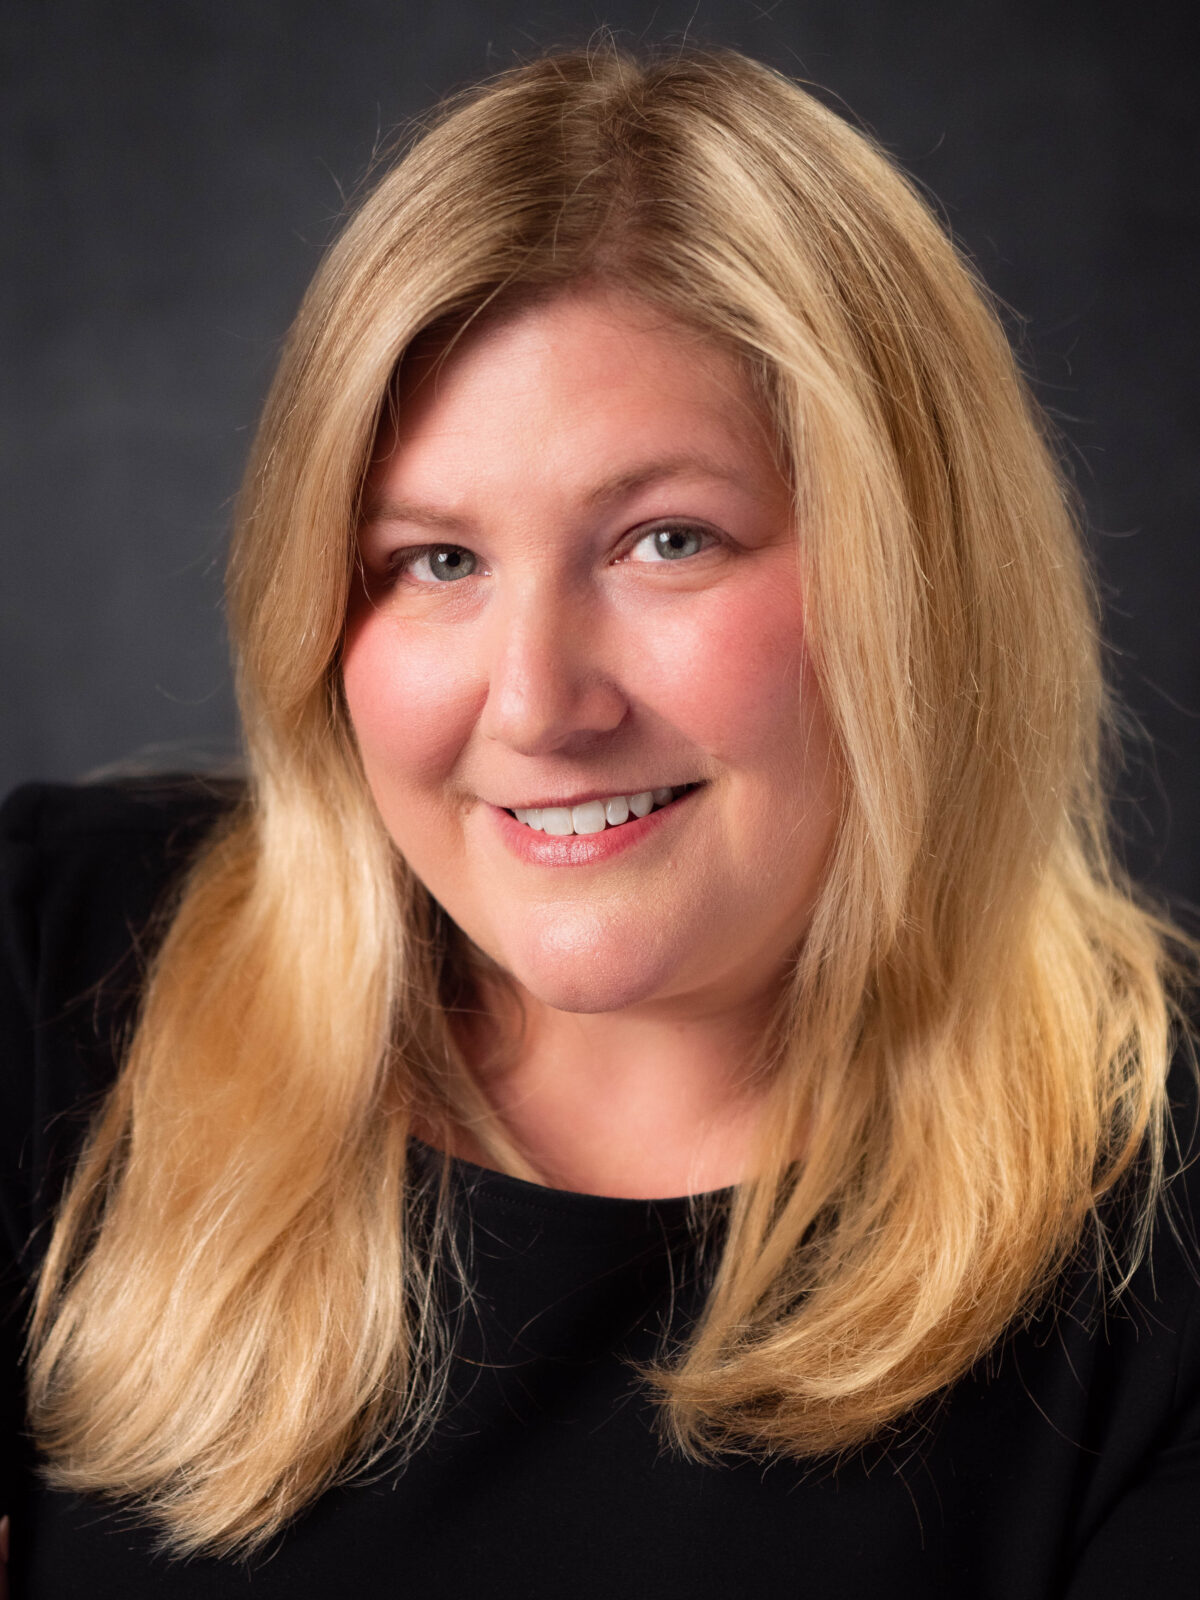 Beth Blauer with blonde hair and black shirt in front of black background.